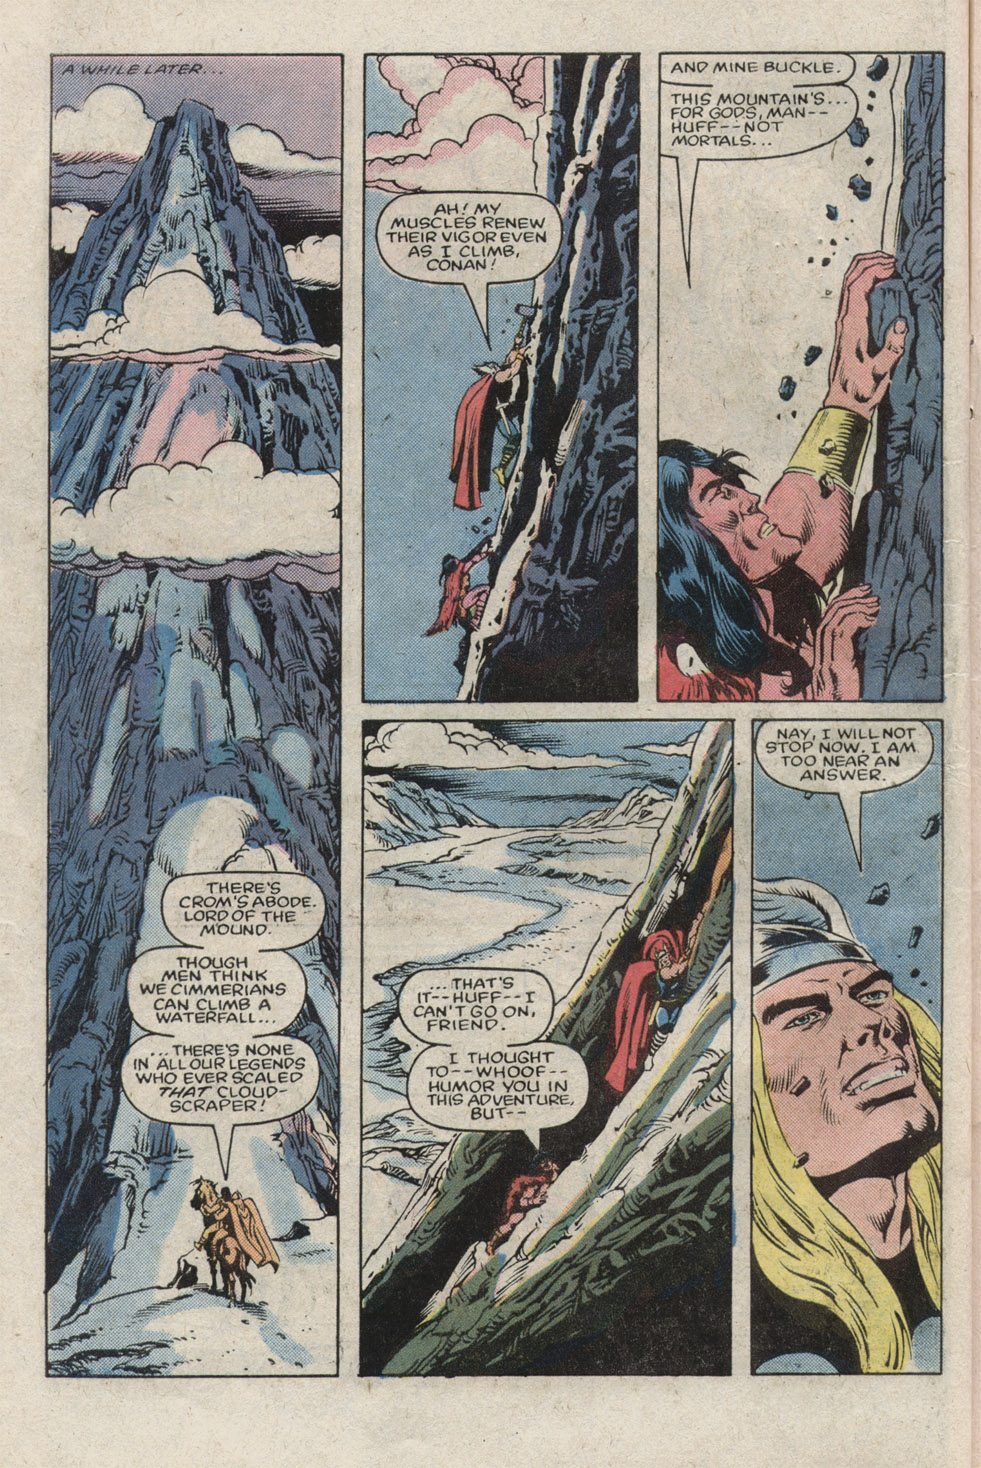 What If? (1977) issue 39 - Thor battled conan - Page 22